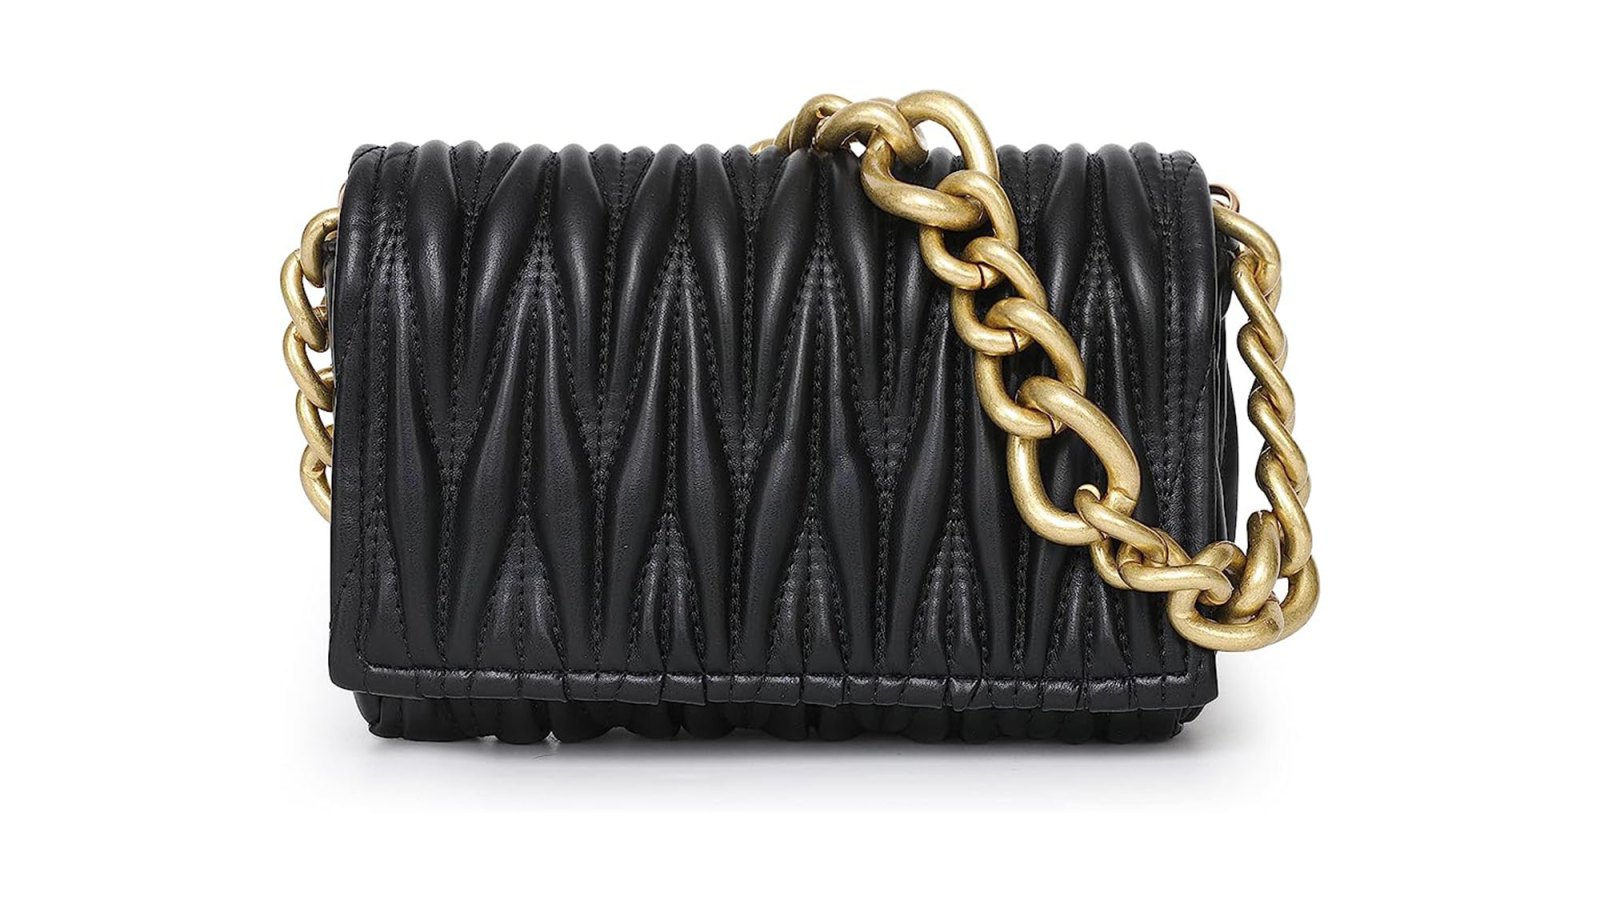 Shop This Chic Quilted Shoulder Bag On Sale for Under $30!